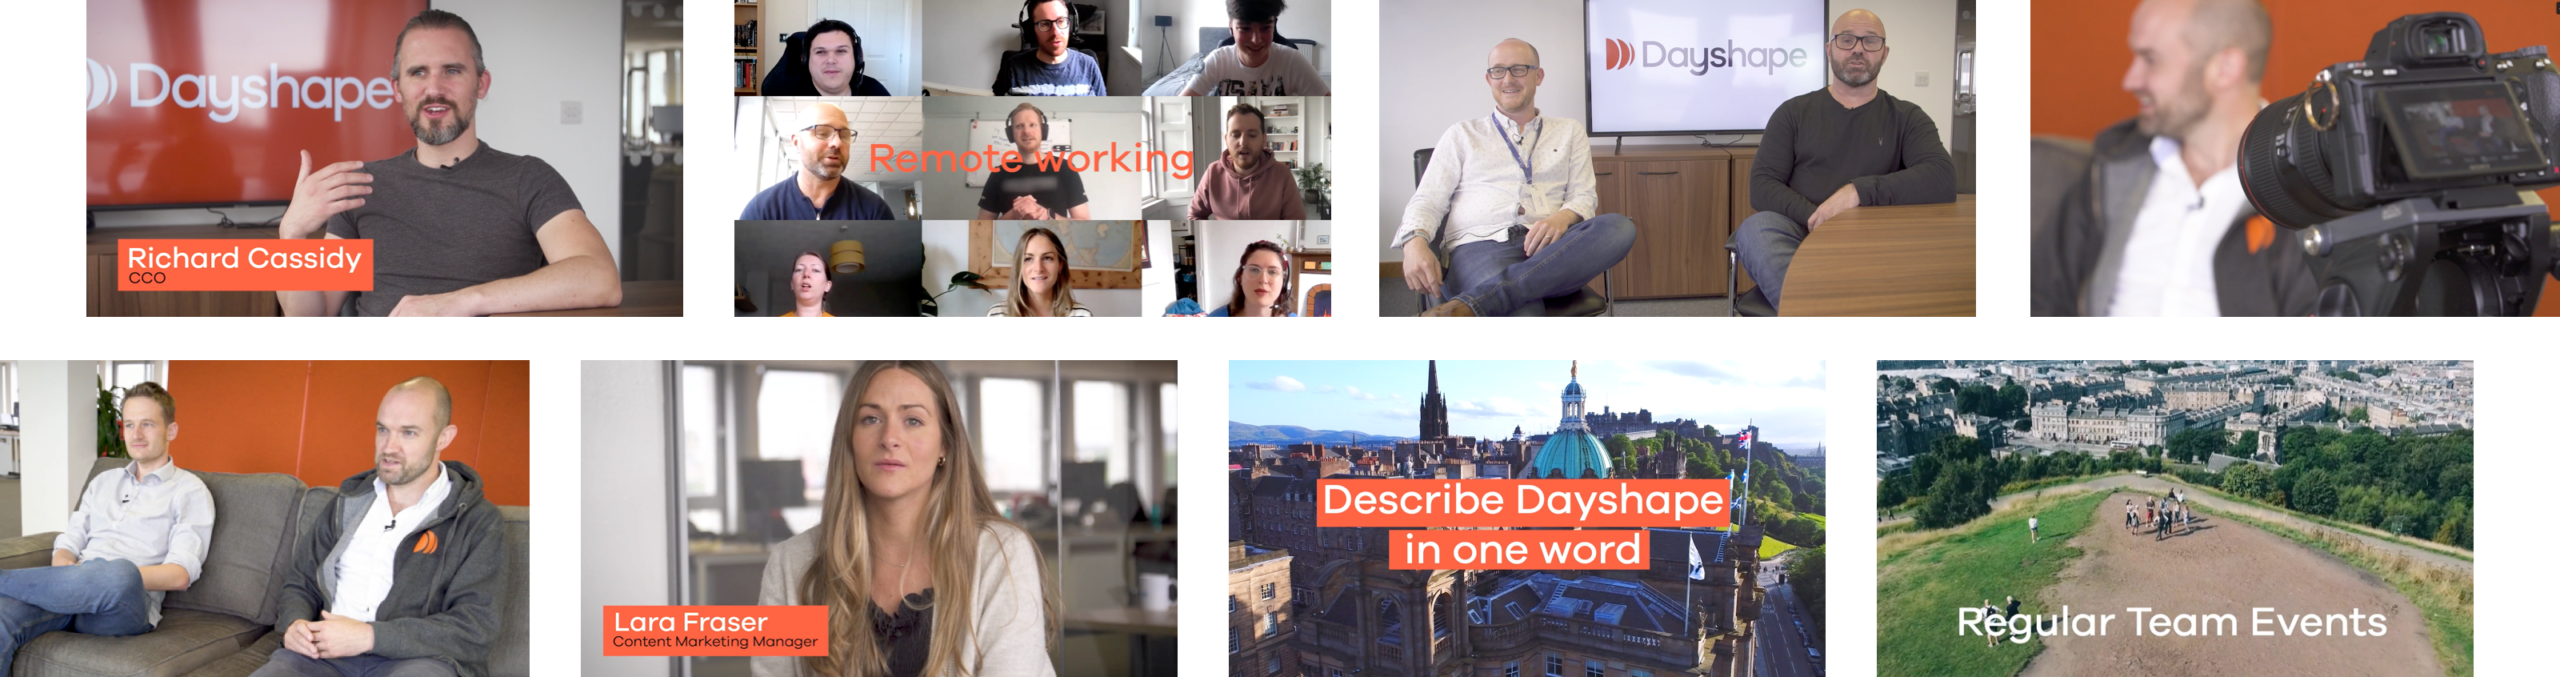 A two-row carousel of different images with staff members and the text “Dayshape ranked Scotland’s fastest-growing technology company for the third year running” and “Describe Dayshape in one word